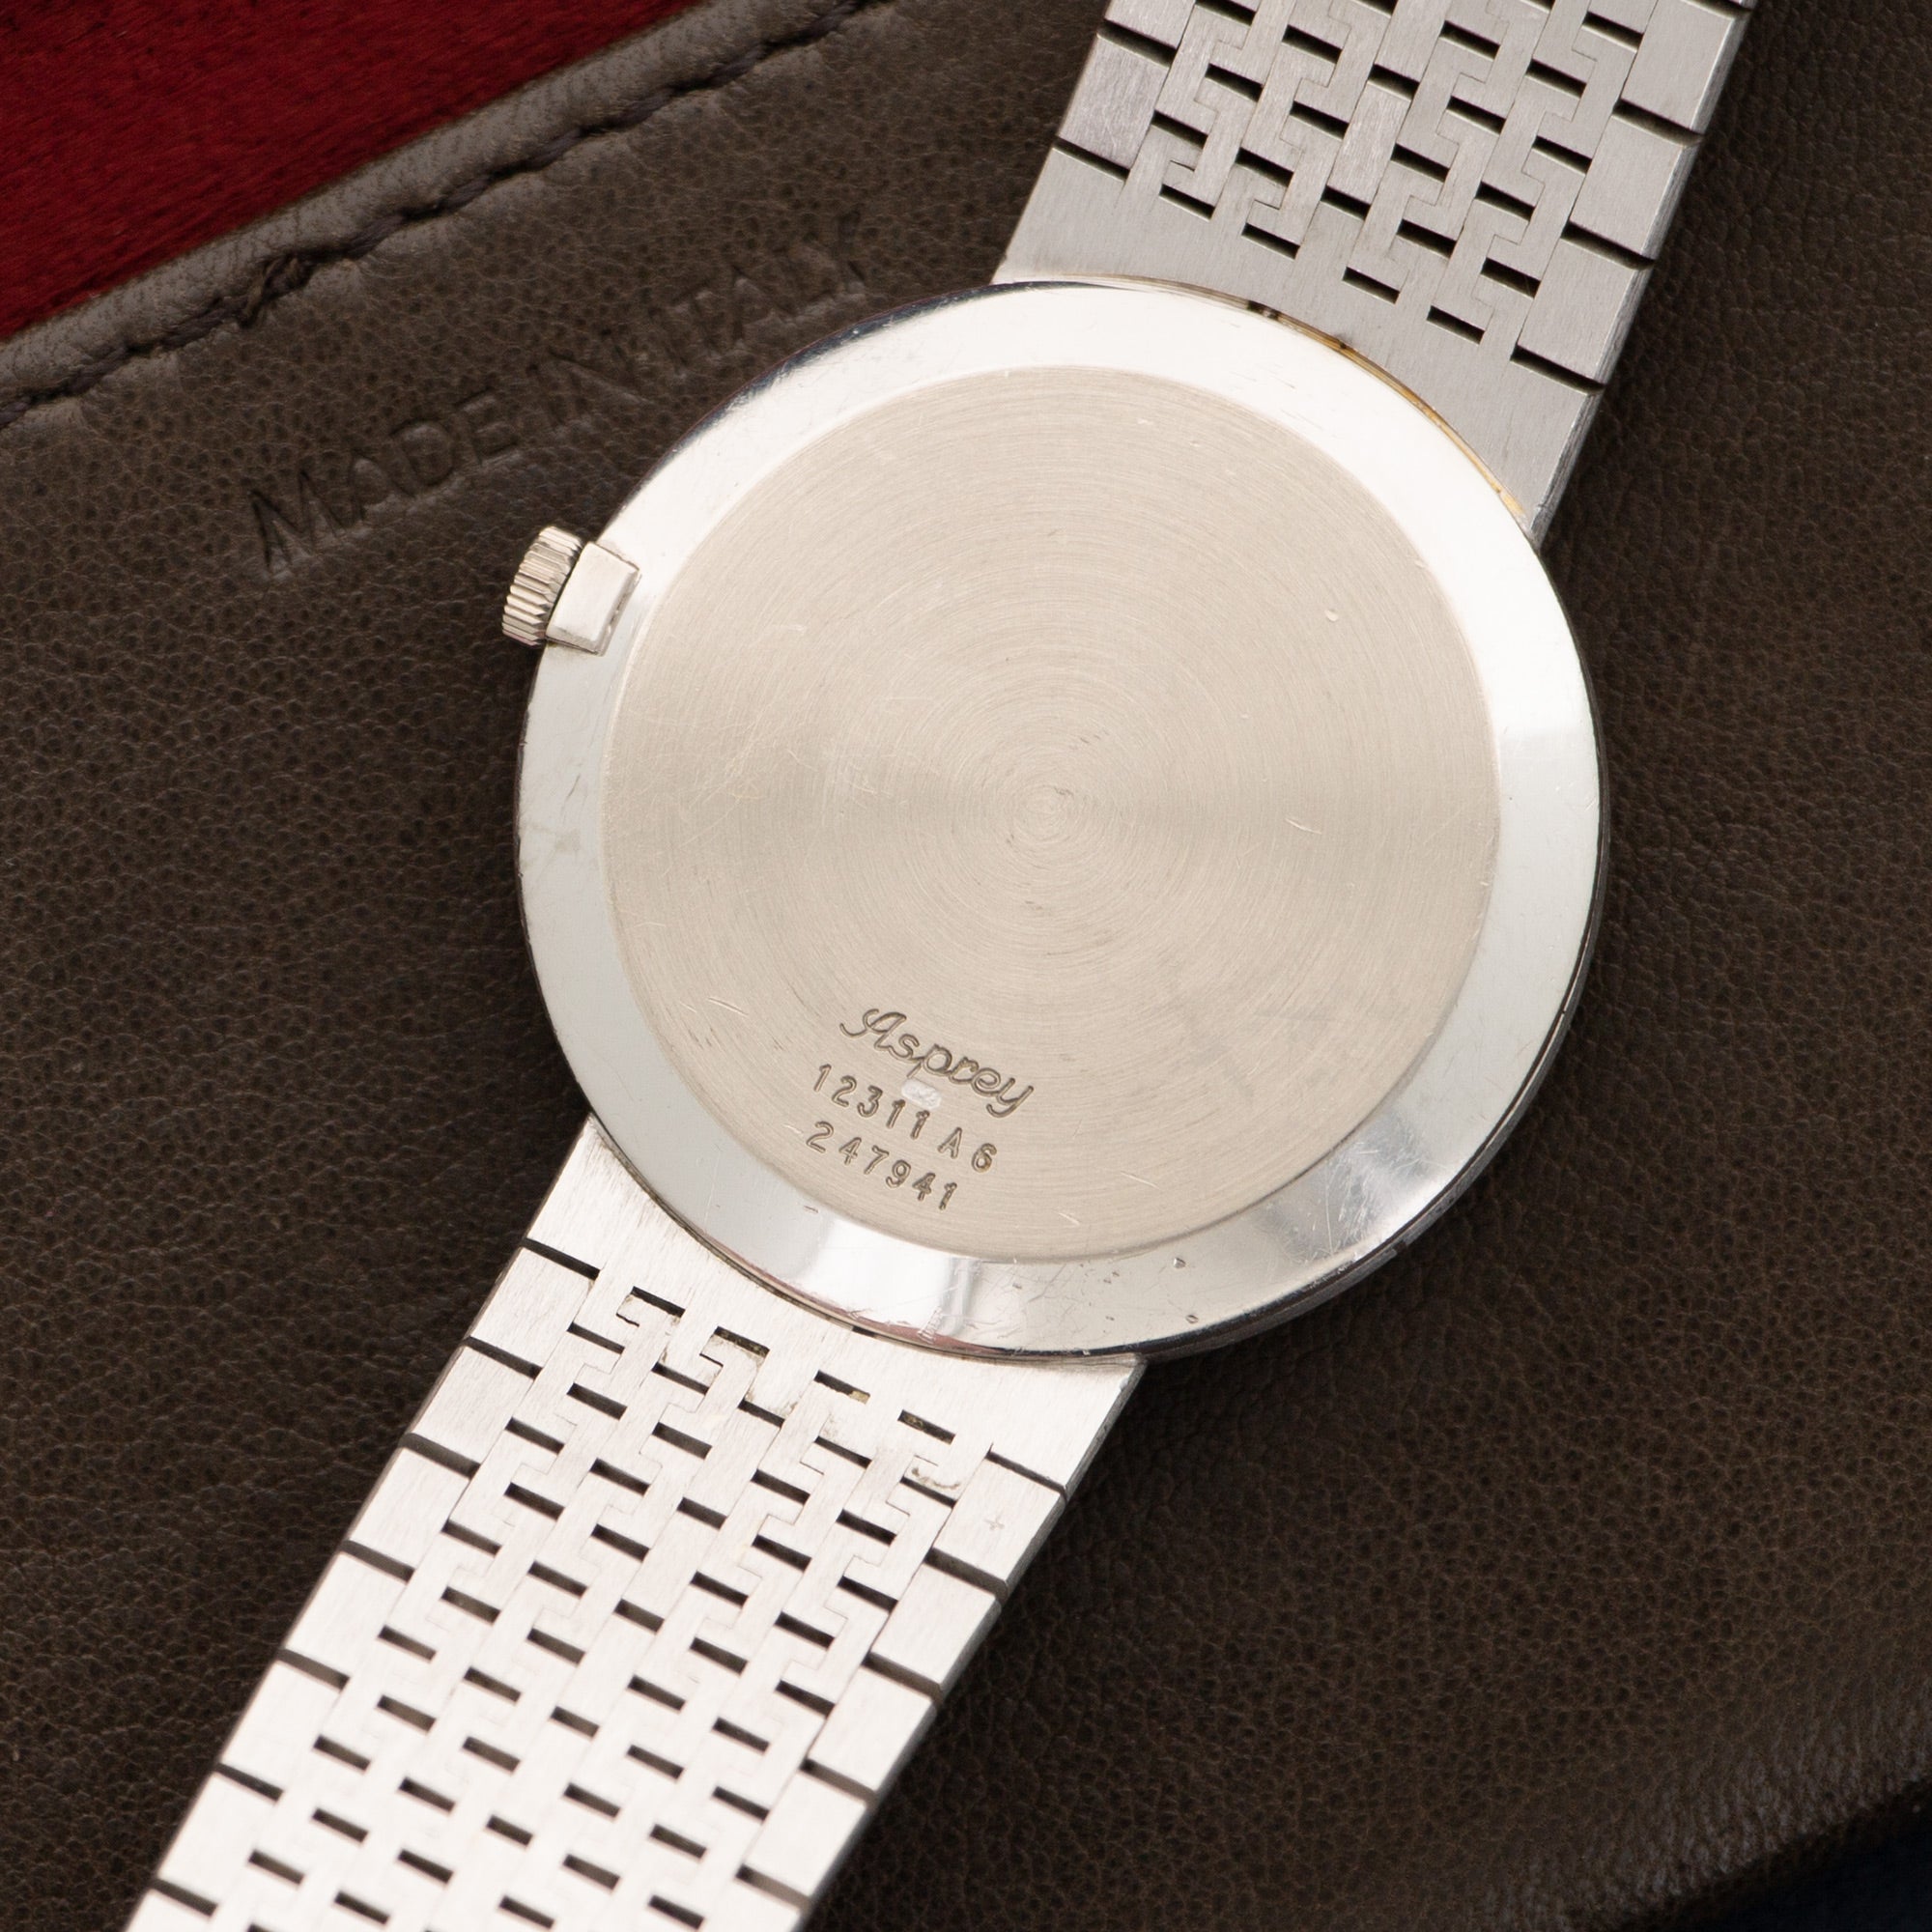 Piaget - Piaget White Gold Automatic Watch Ref. 12311, Retailed by Asprey - The Keystone Watches